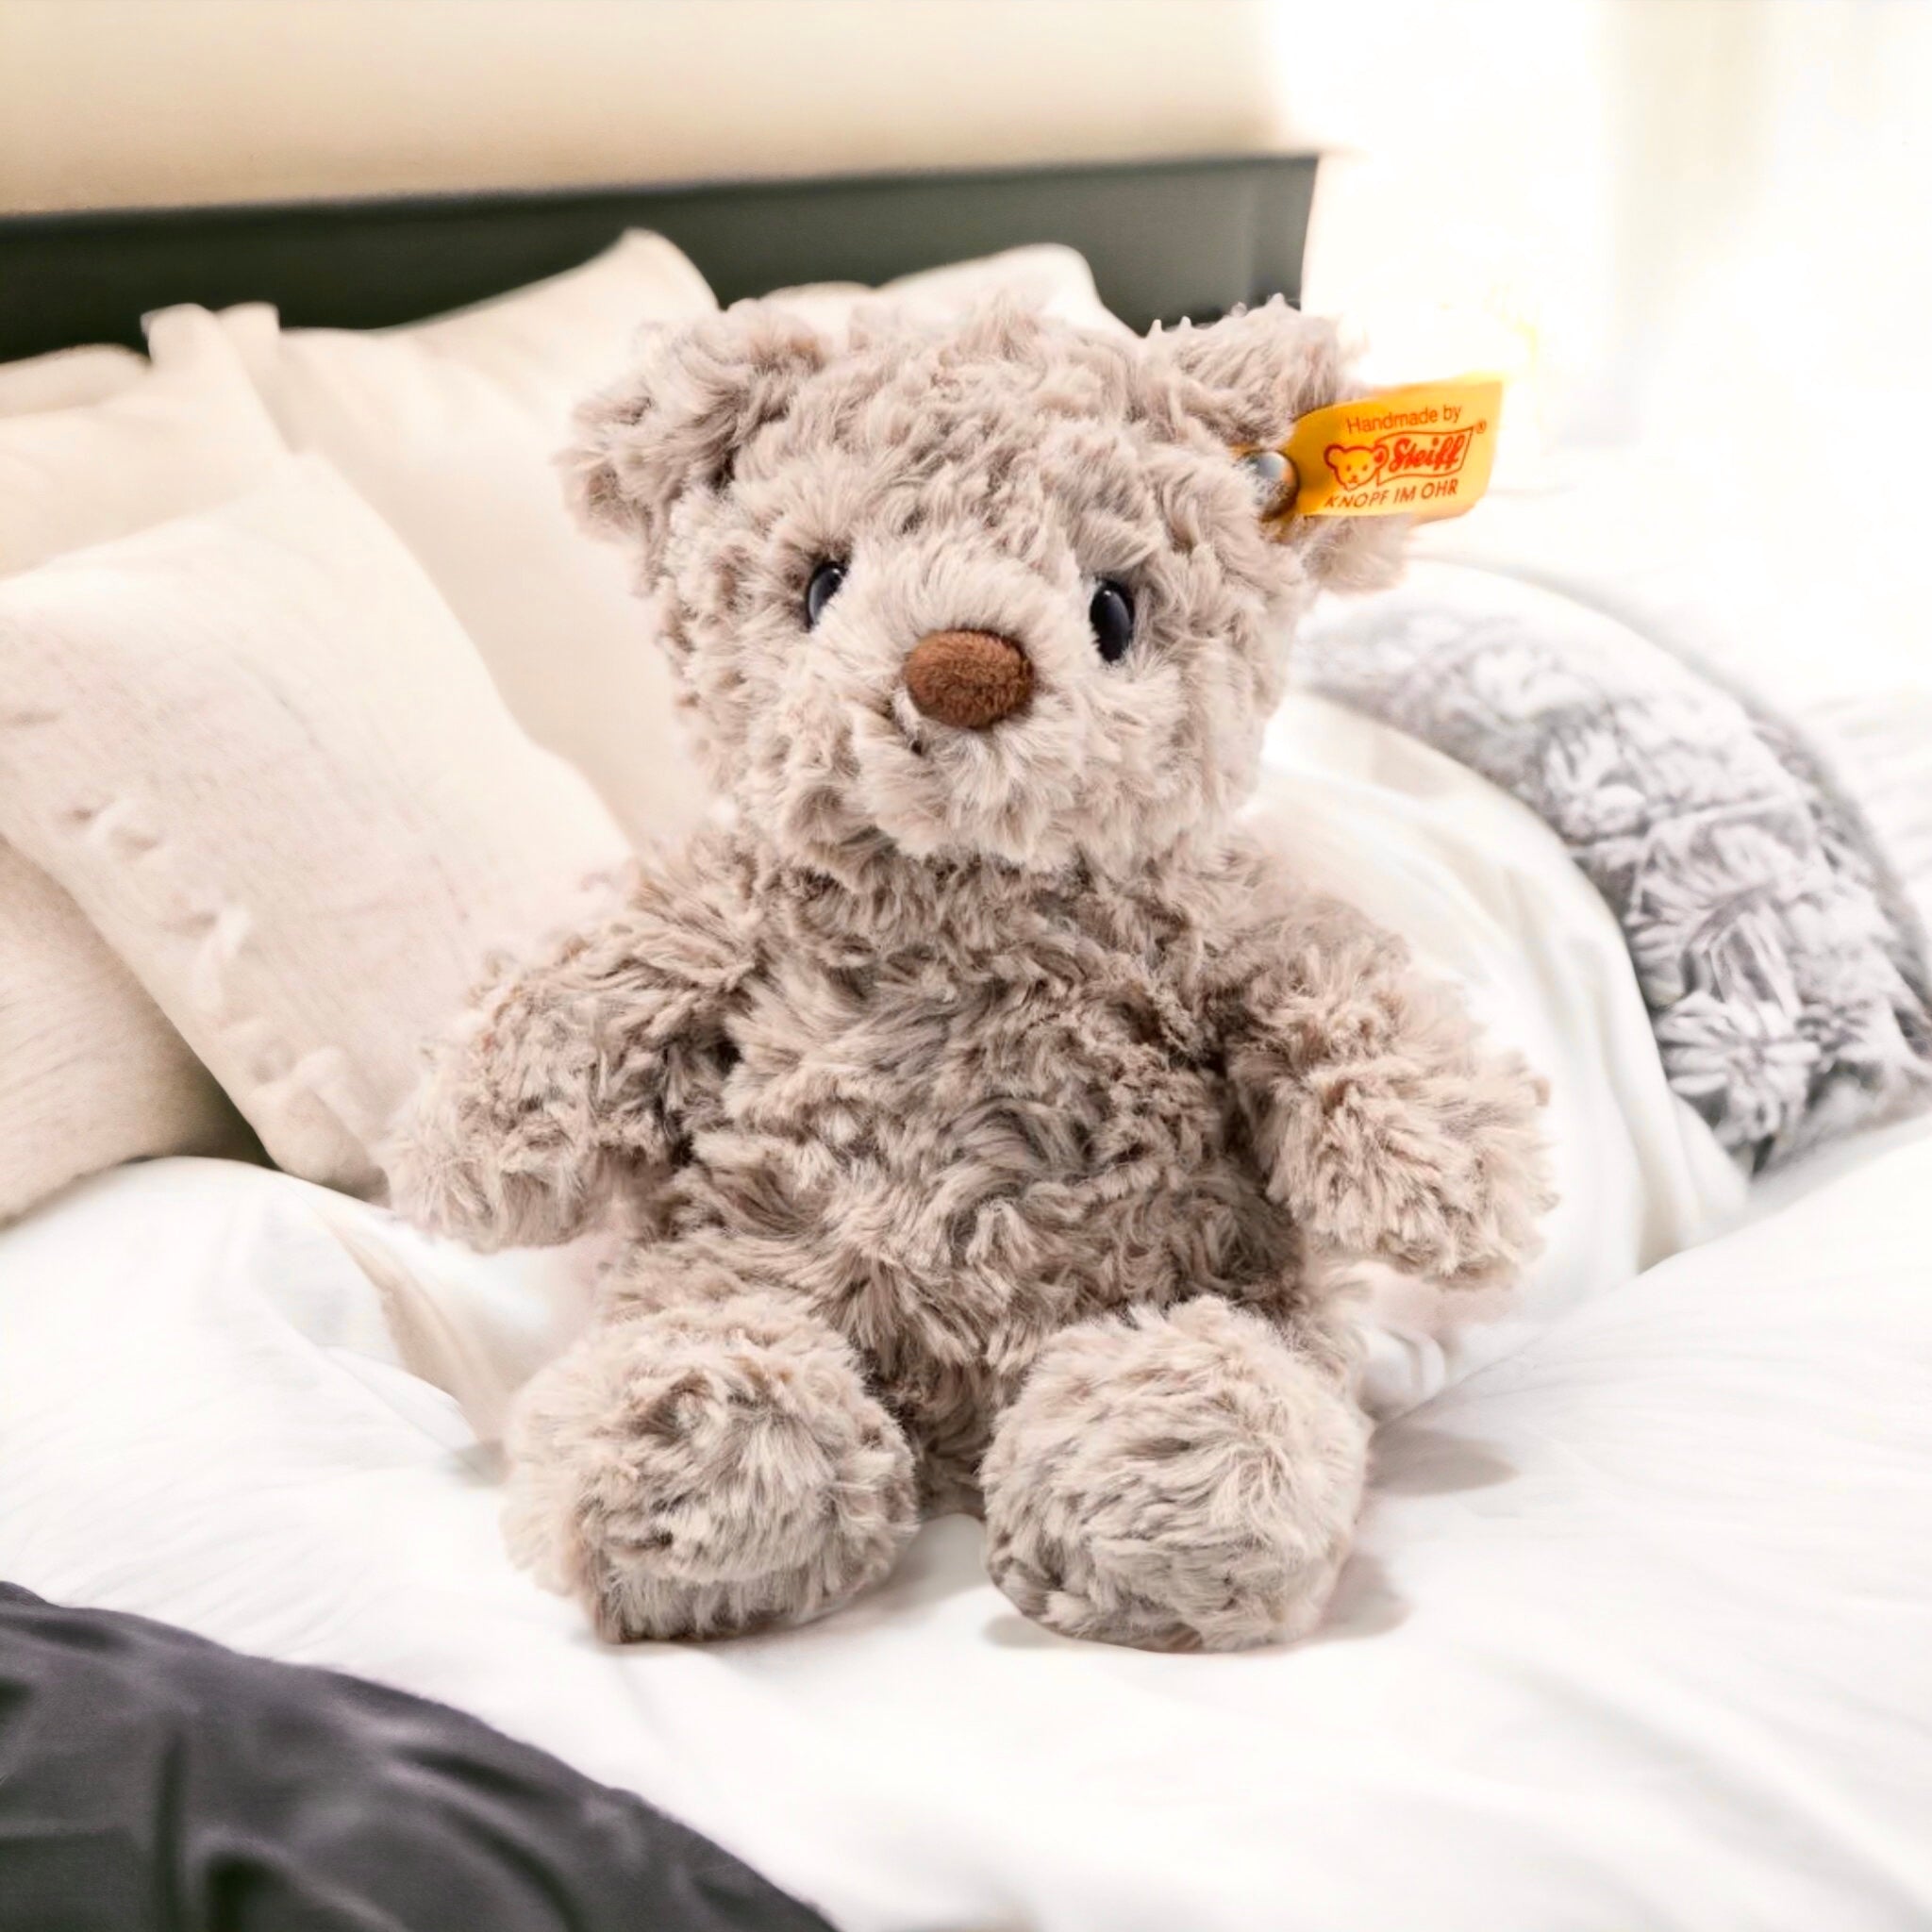 New Baby and Parent Hamper: Steiff Teddy and Treats